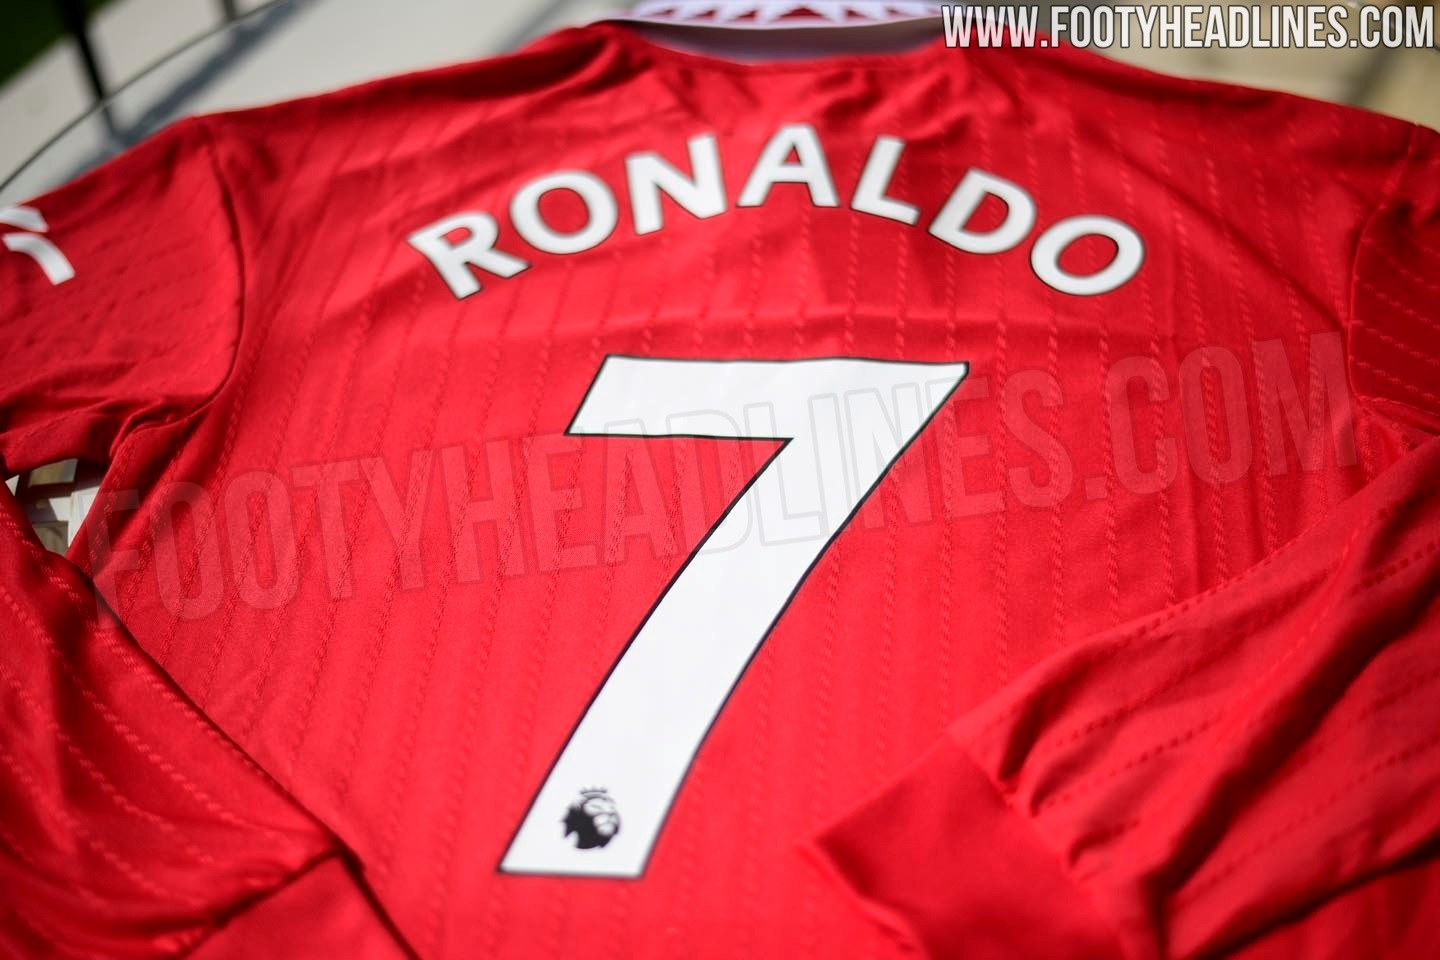 Manchester united kit 2021/22 - MUFC Adidas Jersey - Authentic vs Replica -  Jersey Comparison CR7 